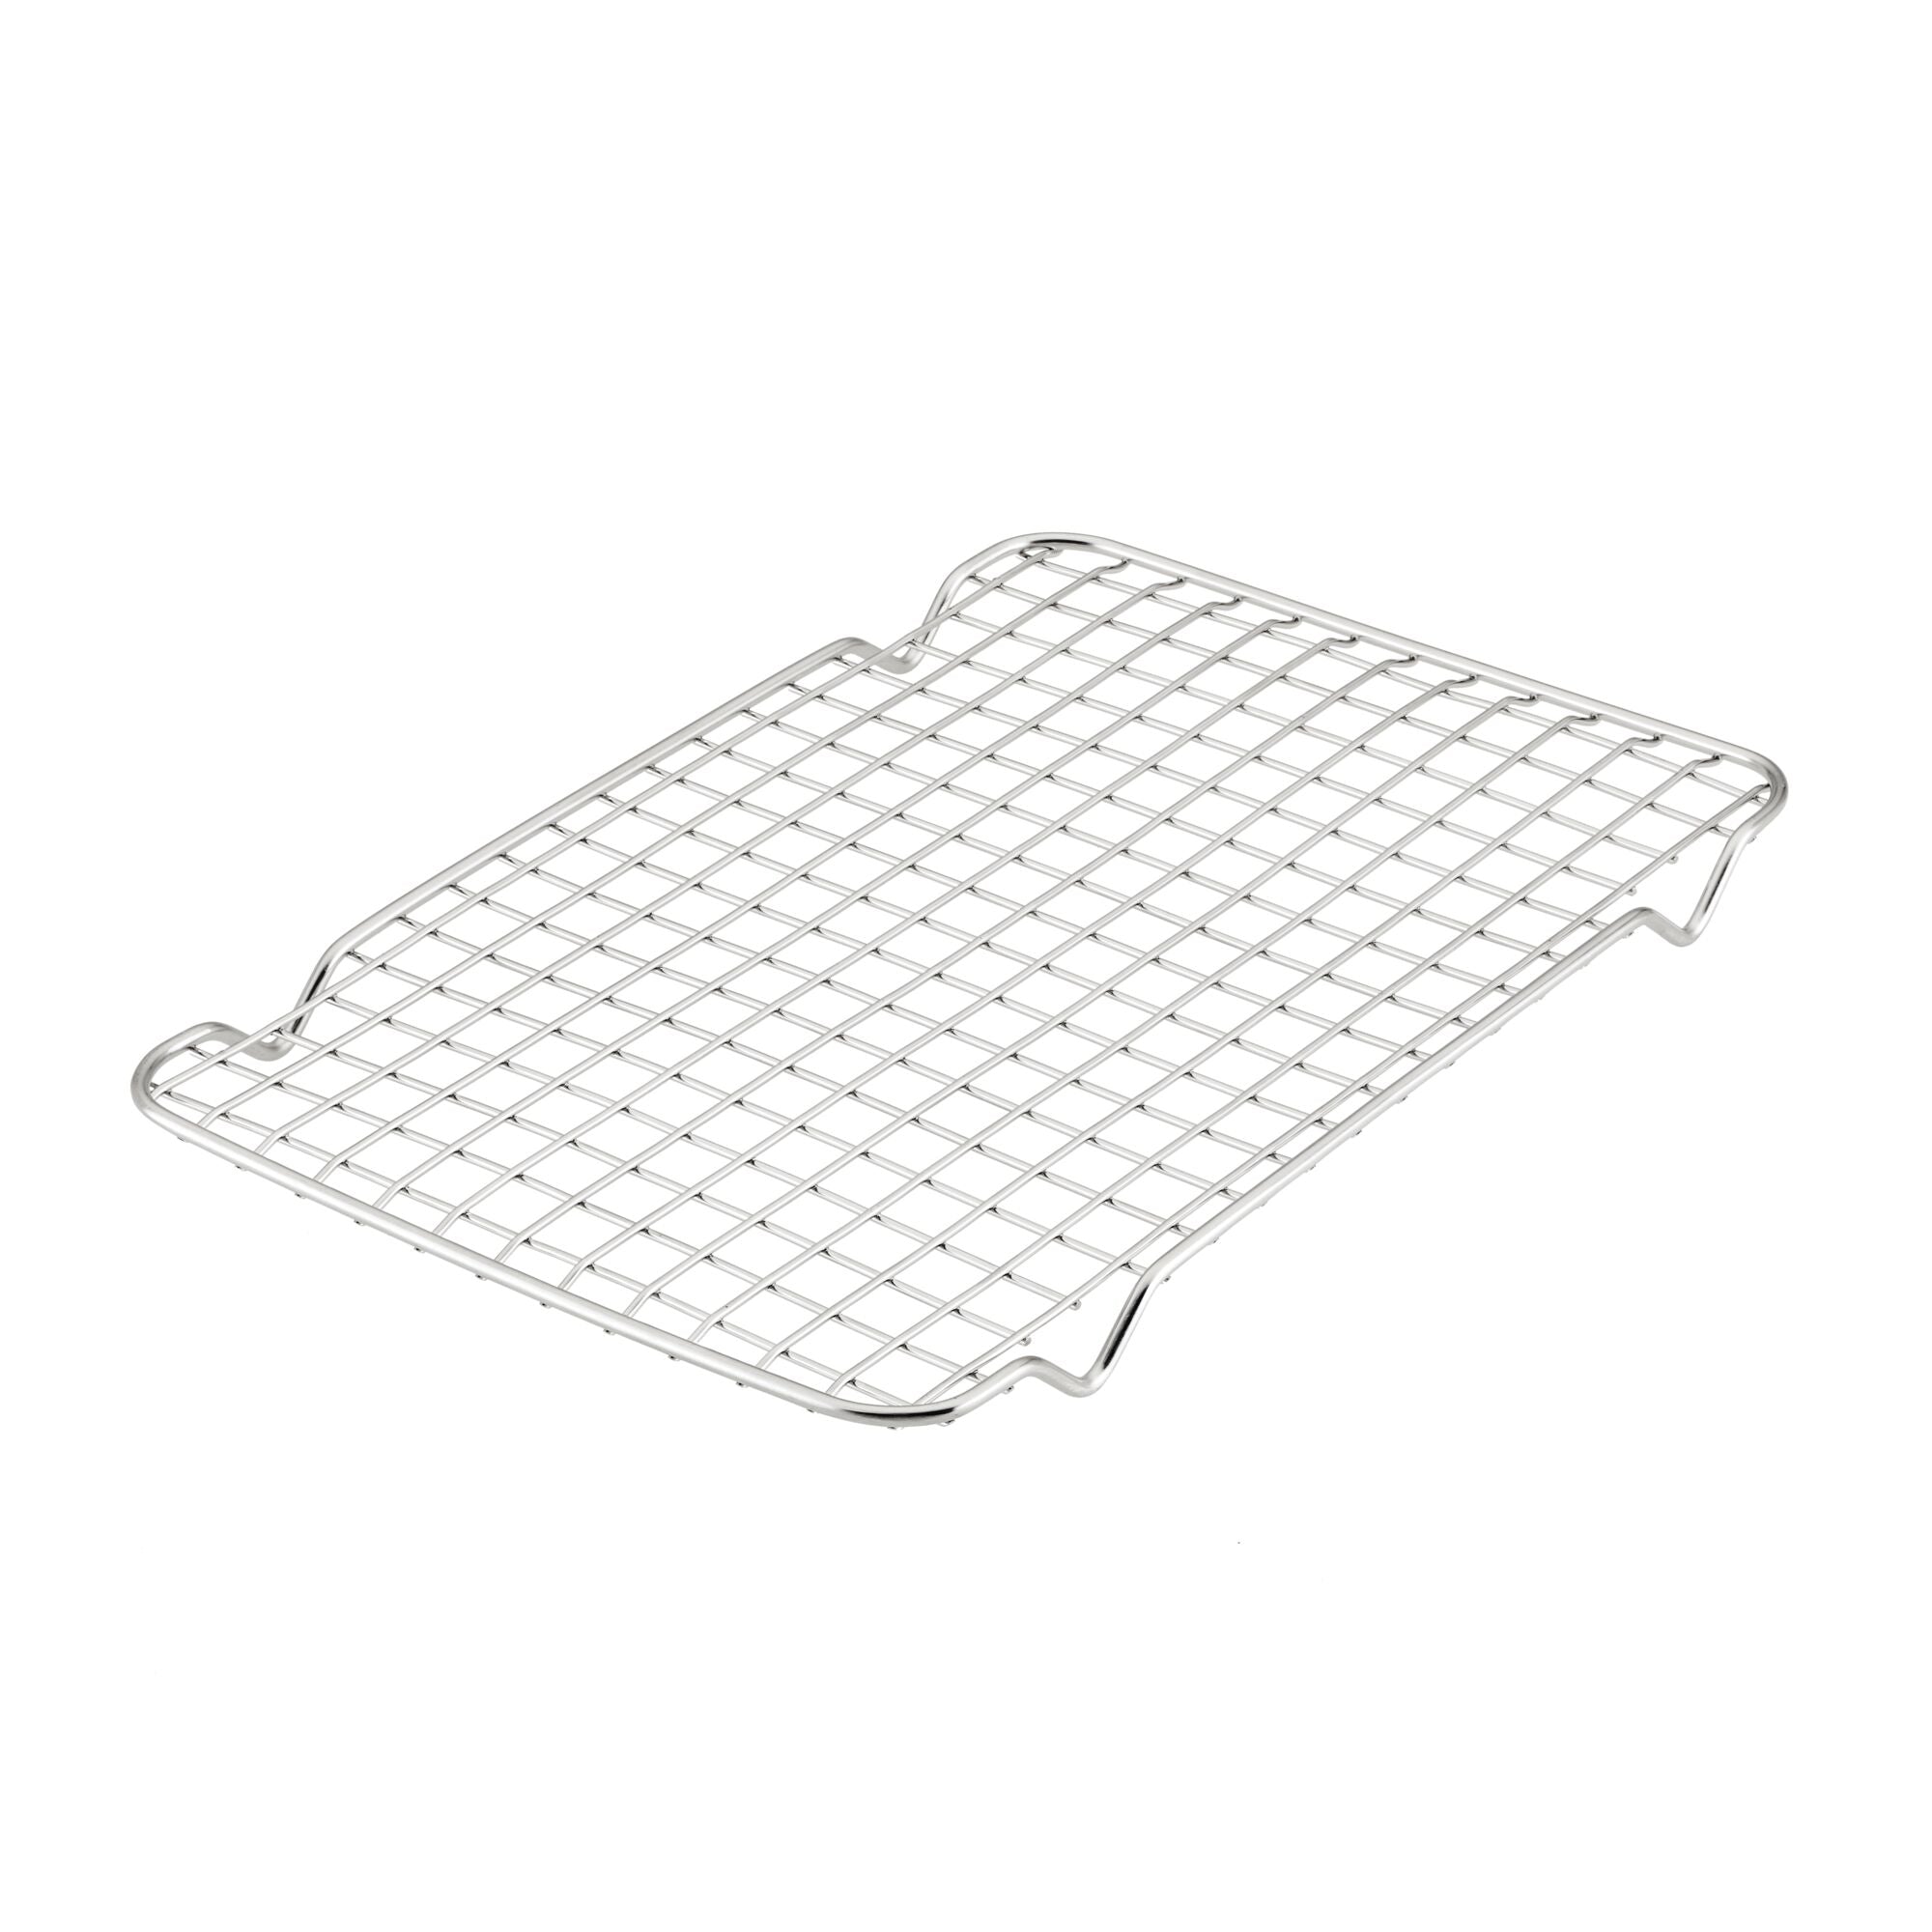 Checkered Chef Cooling Rack -26*23cm Oven Safe Stainless Steel Baking Rack  For Cooking